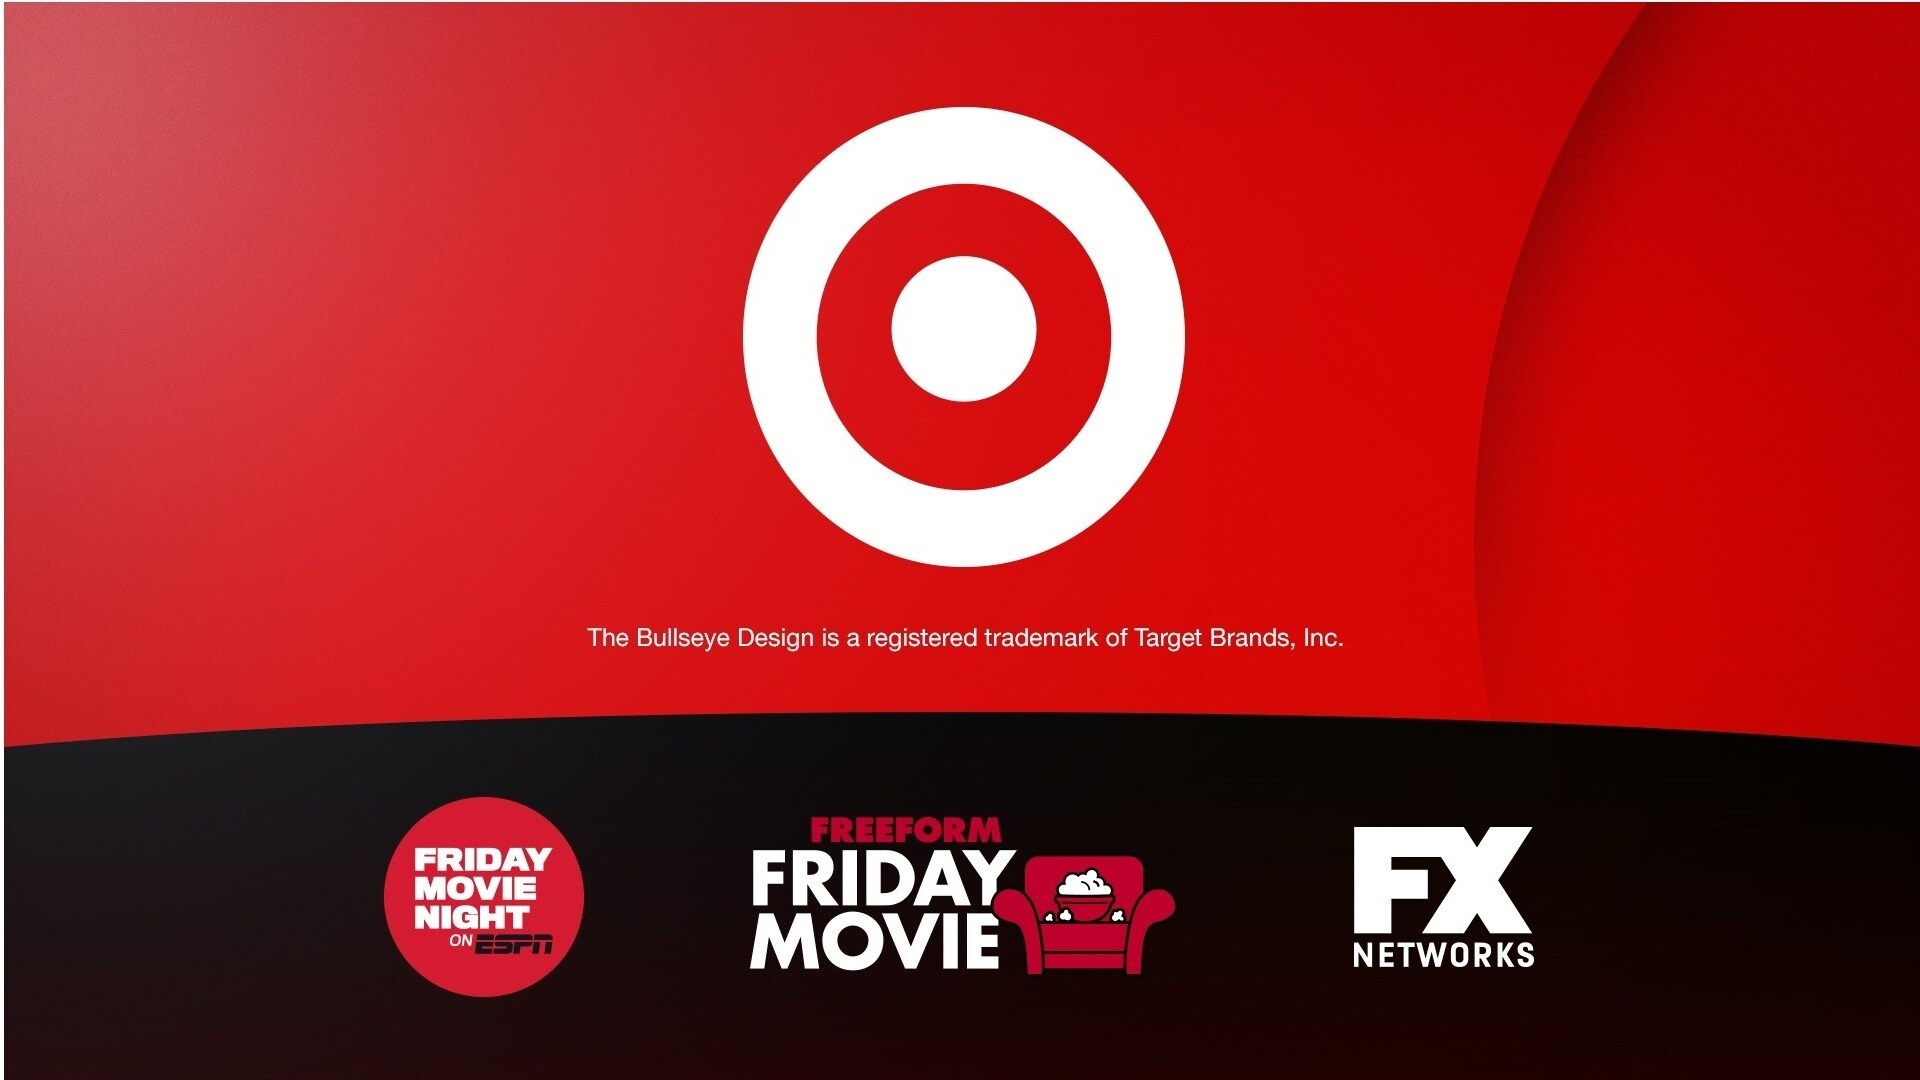 ESPN, Freeform and FX Bring FRIDAY NIGHT MOVIE with Limited Commercial Interruptions, Presented by Target